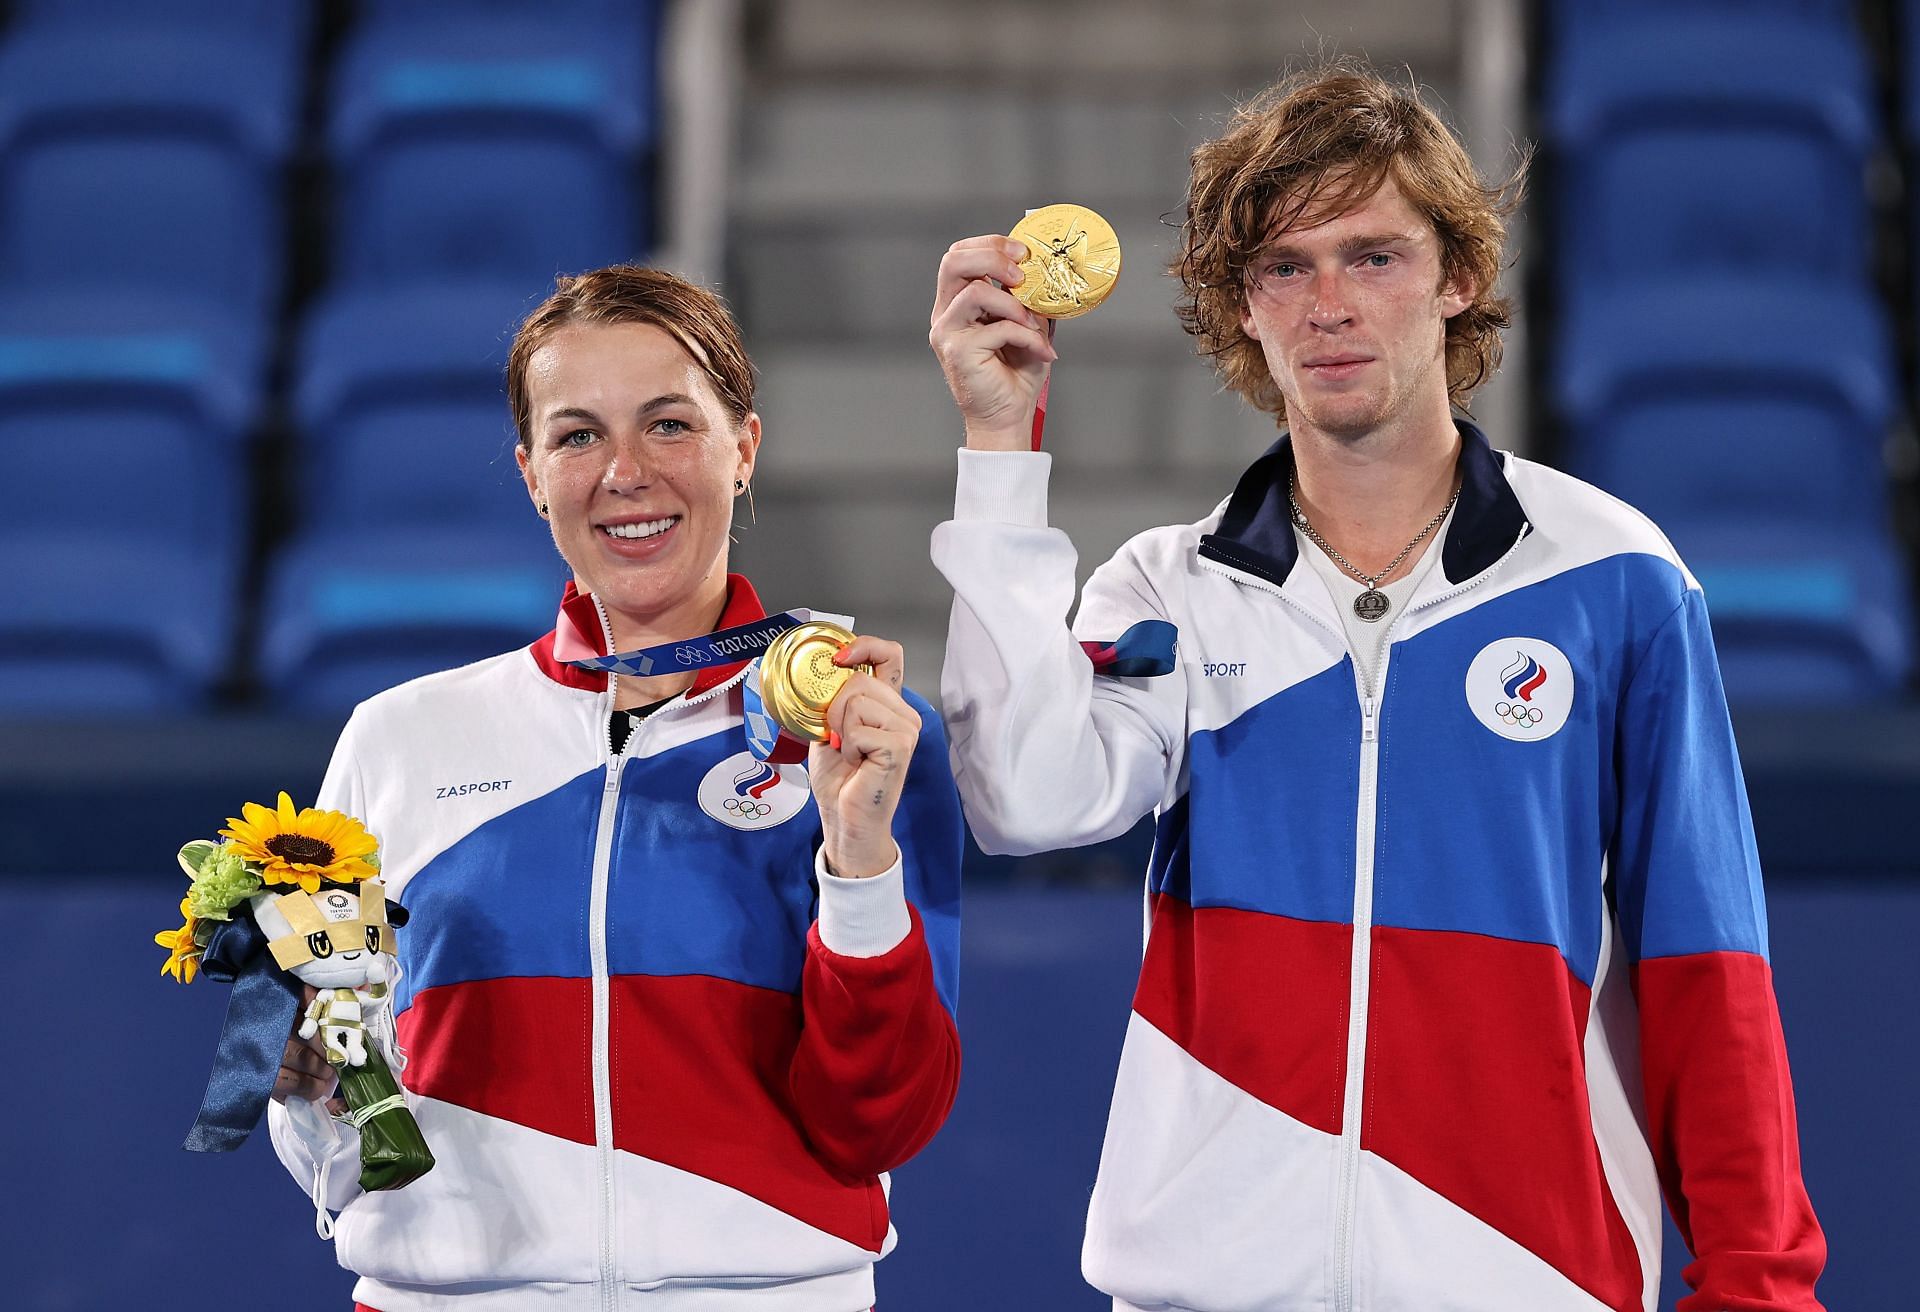 Anastasia Pavlyuchenkova and Andrey Rublev with the gold medals they won at the 2020 Tokyo Olympics